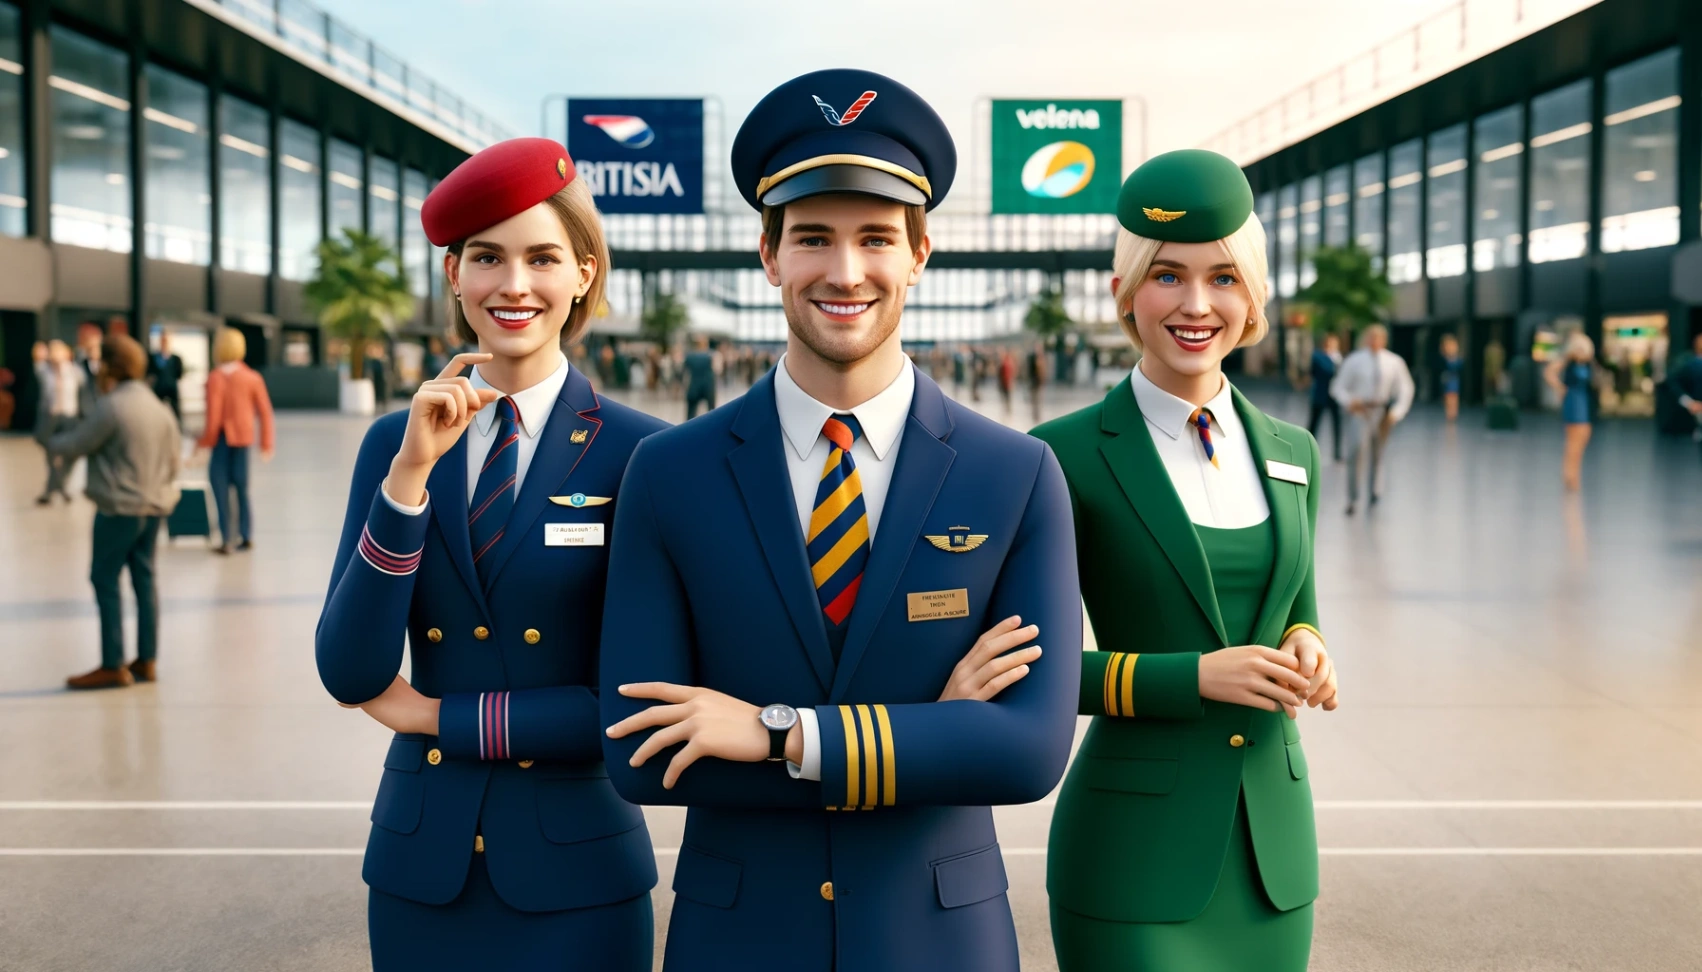 Job Openings at International Airlines Group: Learn How to Apply